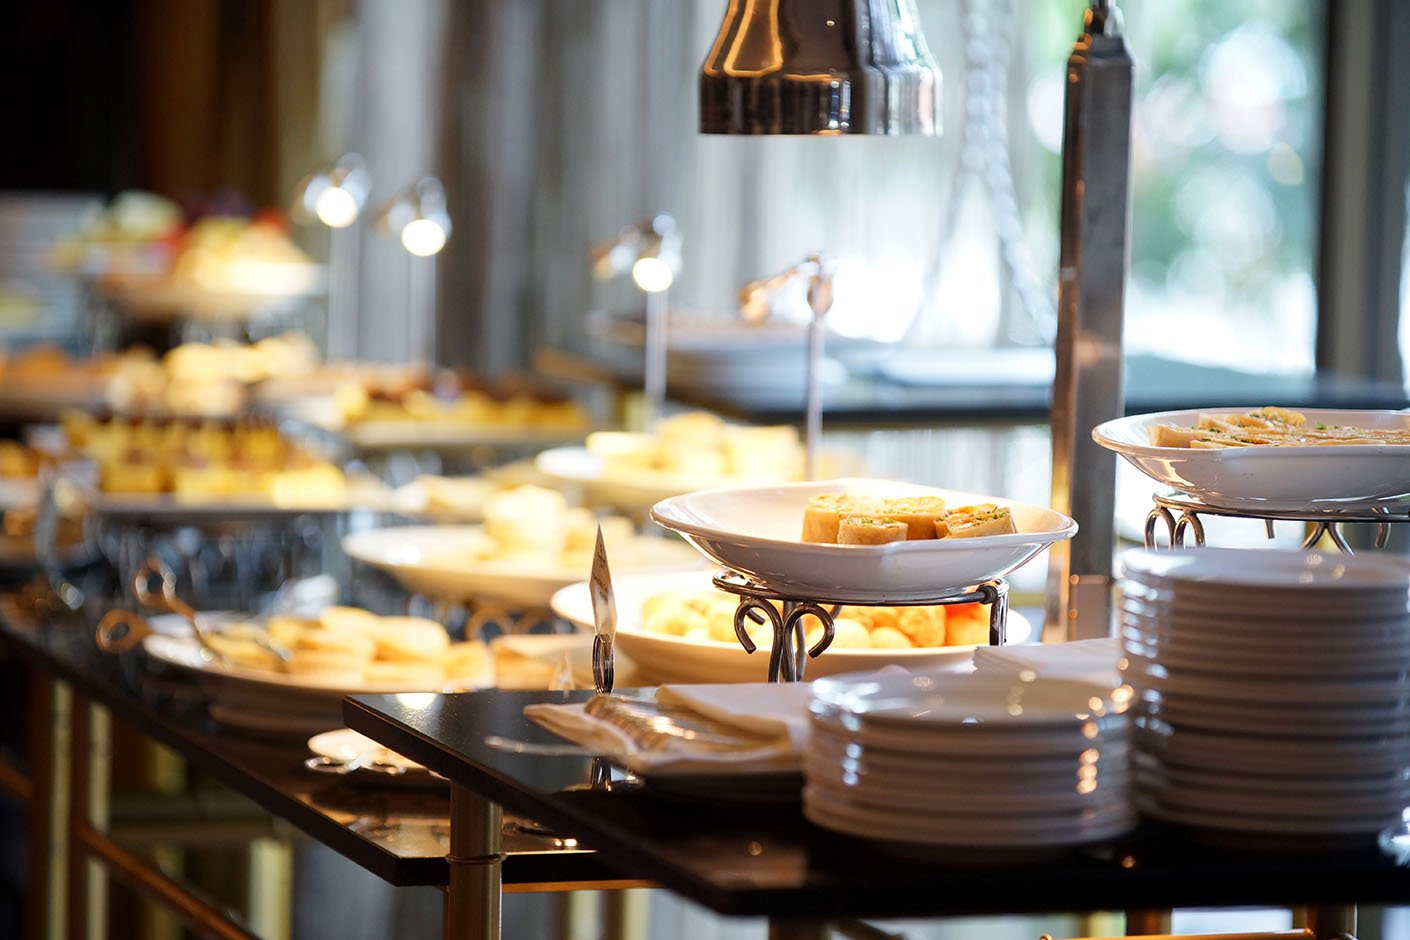 Hotel & Restaurant Services - FOOD AND BEVERAGE SERVICES